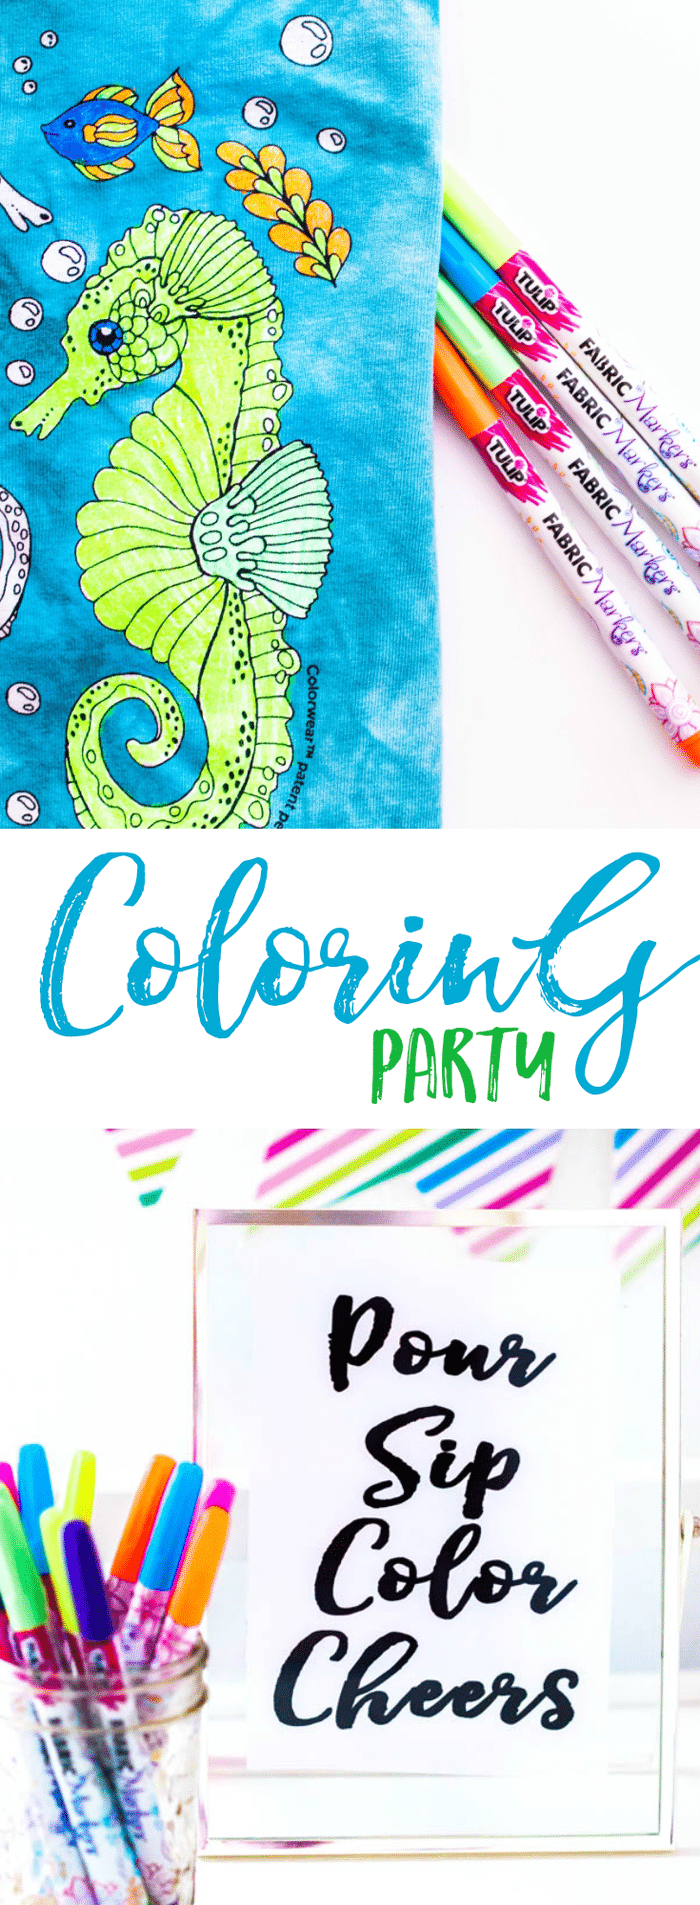 Adult Coloring Party with Free Printables for grownups with event plan with e Mandalas, sacred symbols, animals pets, aquatic ocean scenes, secret gardens